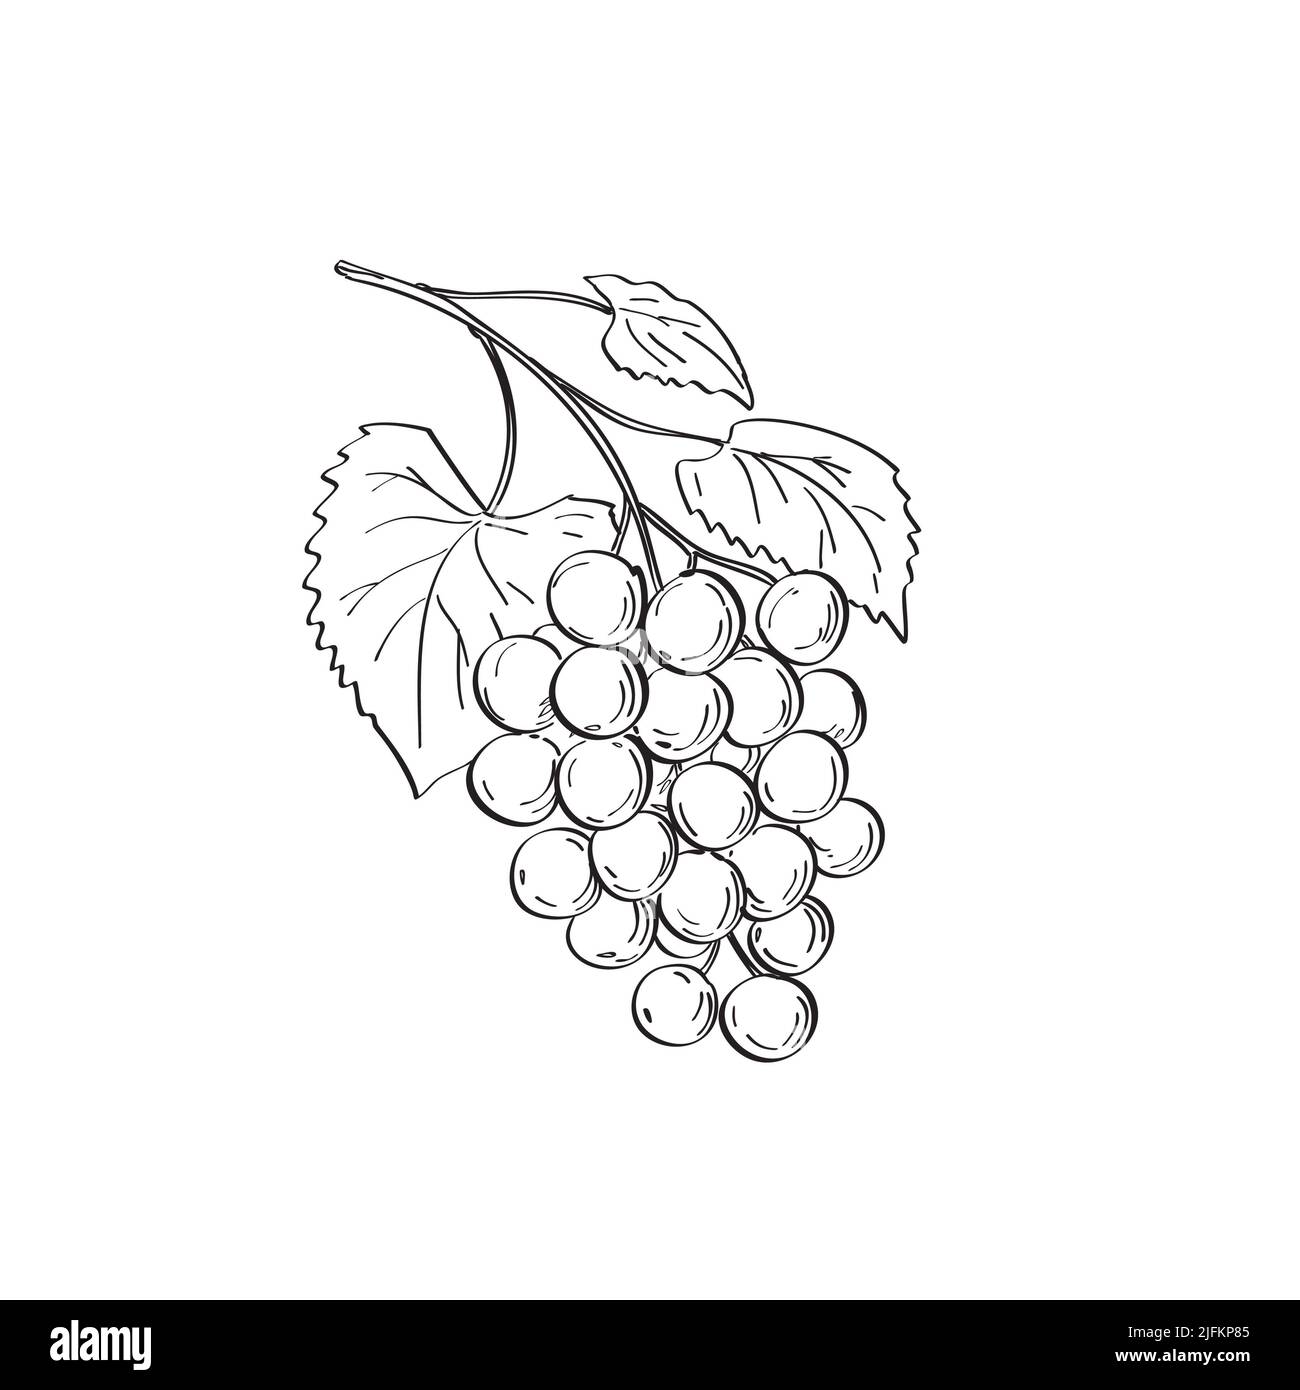 Line art drawing illustration of fruit of muscadine grapes or Vitis rotundifolia, a grapevine species native to southeastern, south-central United Stock Photo